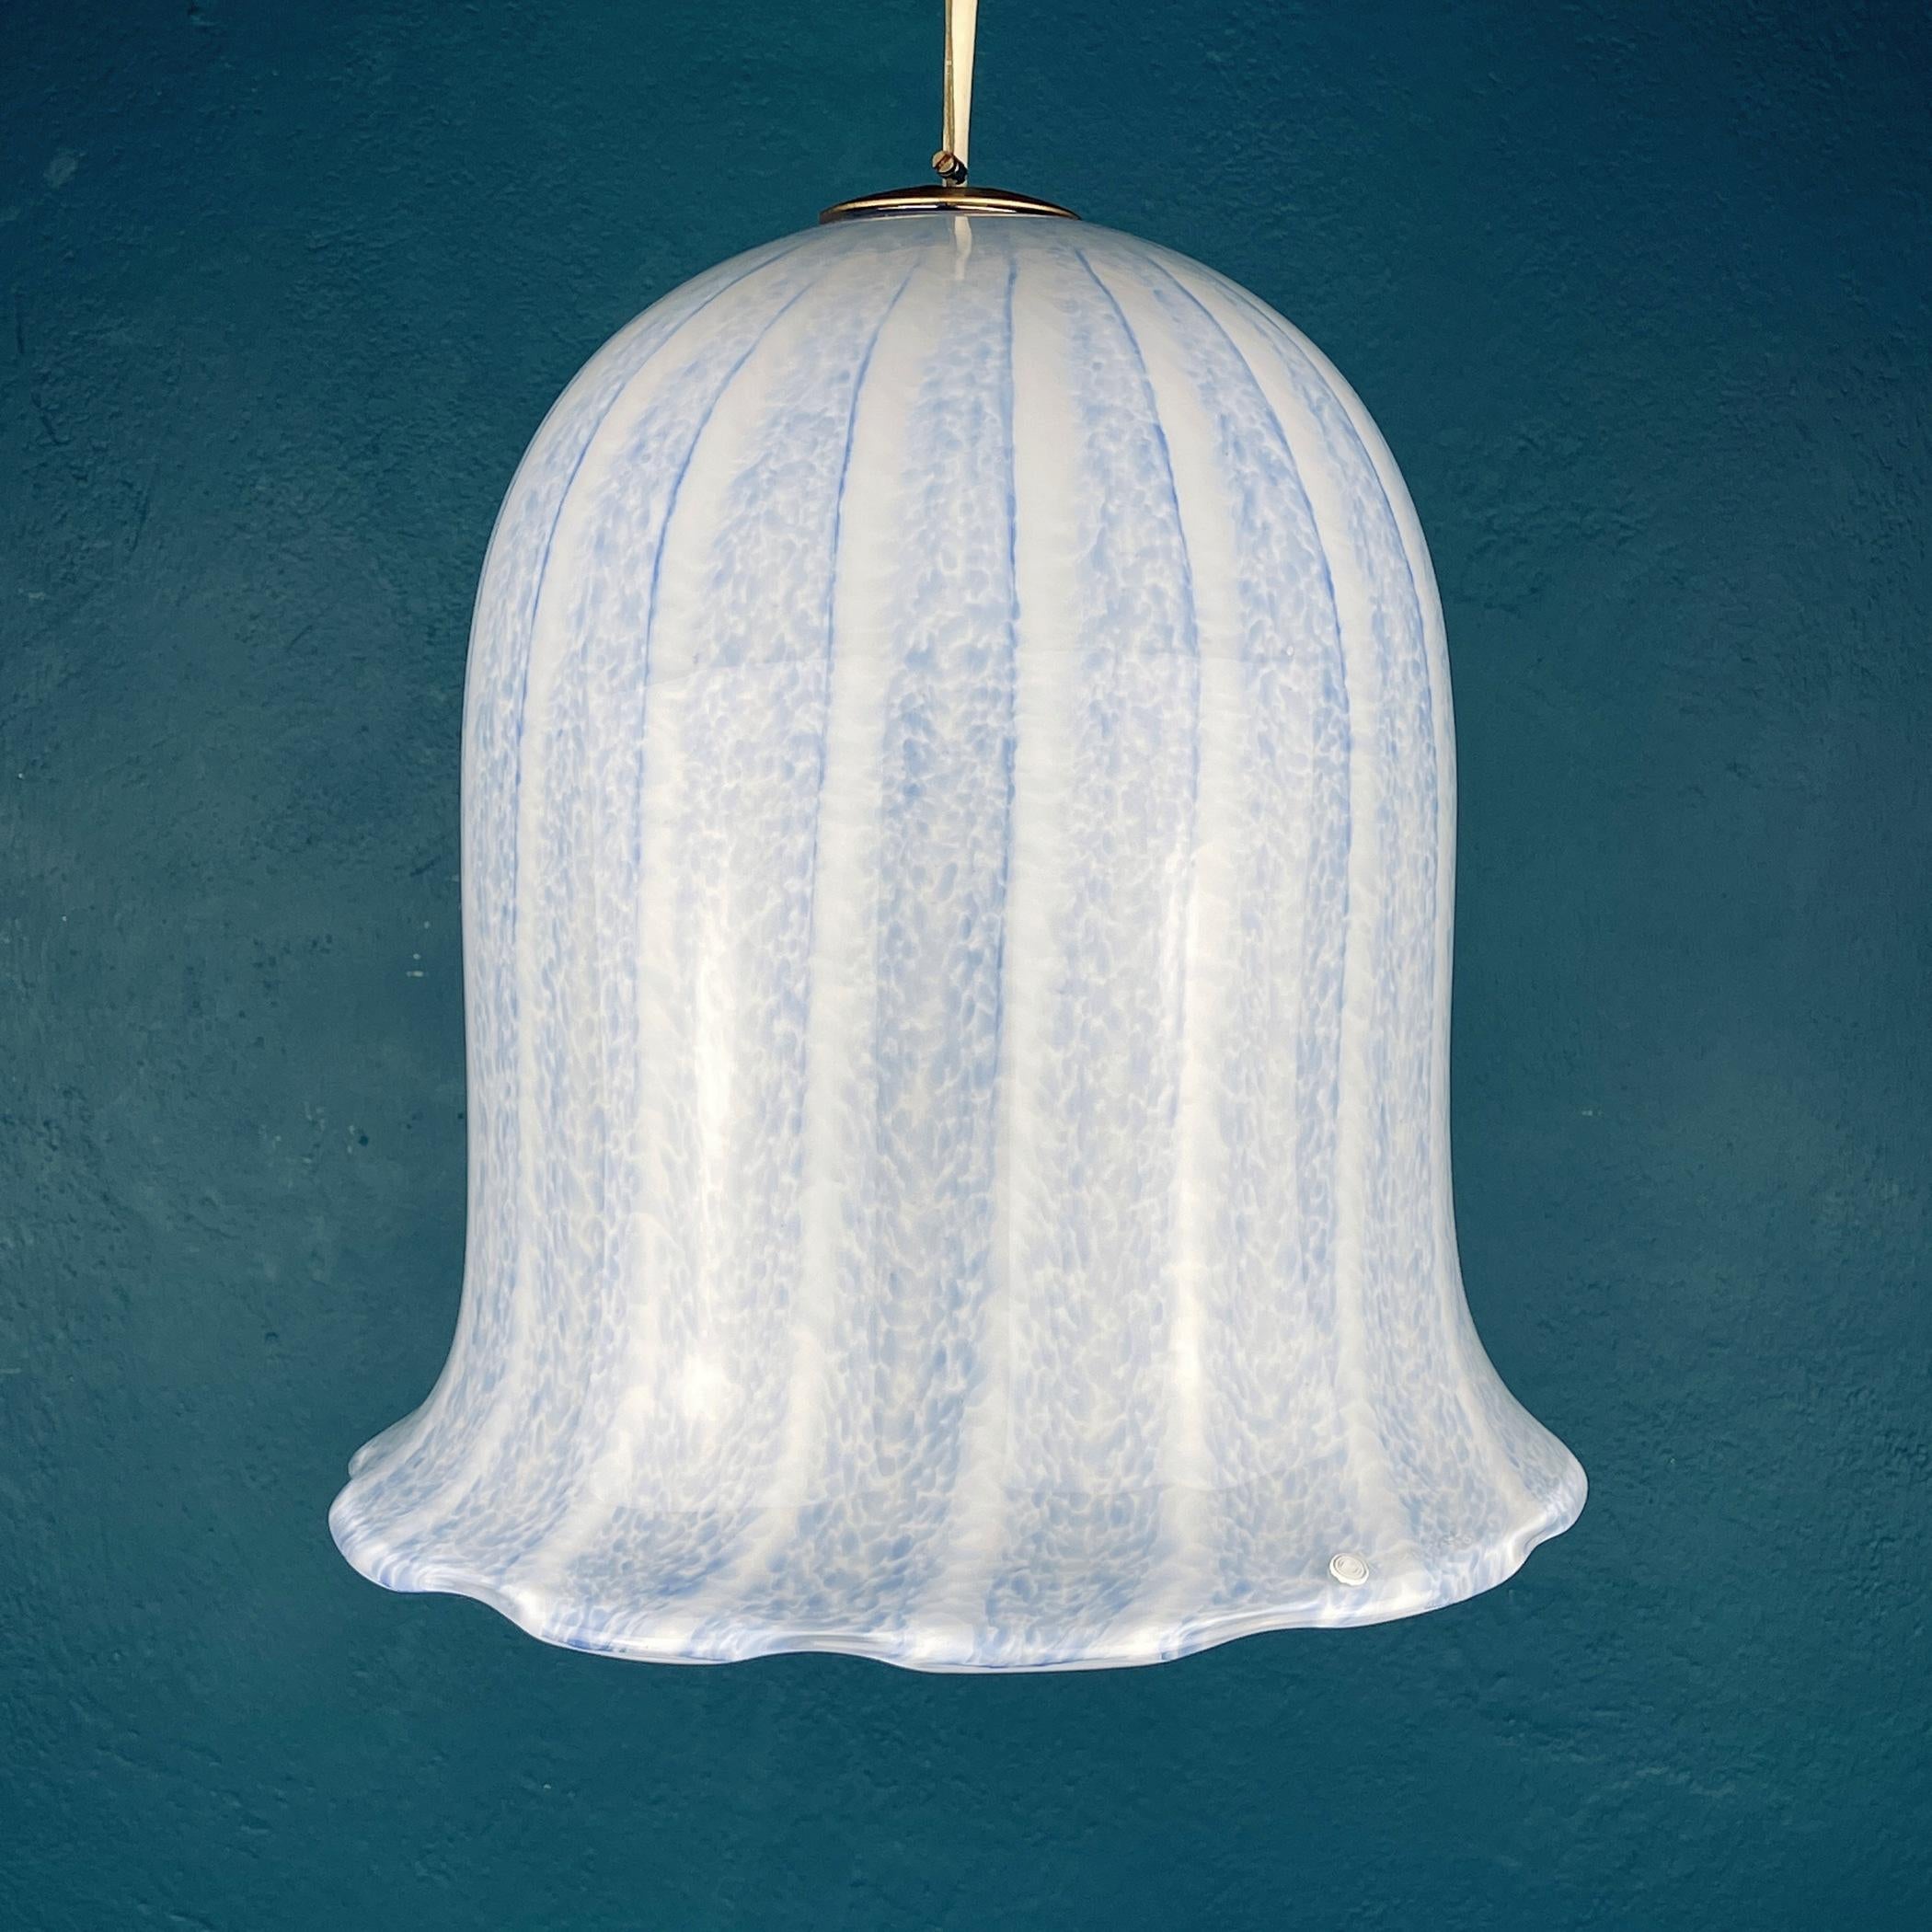 The beautiful vintage blue murano pendant lamp by manufacture 